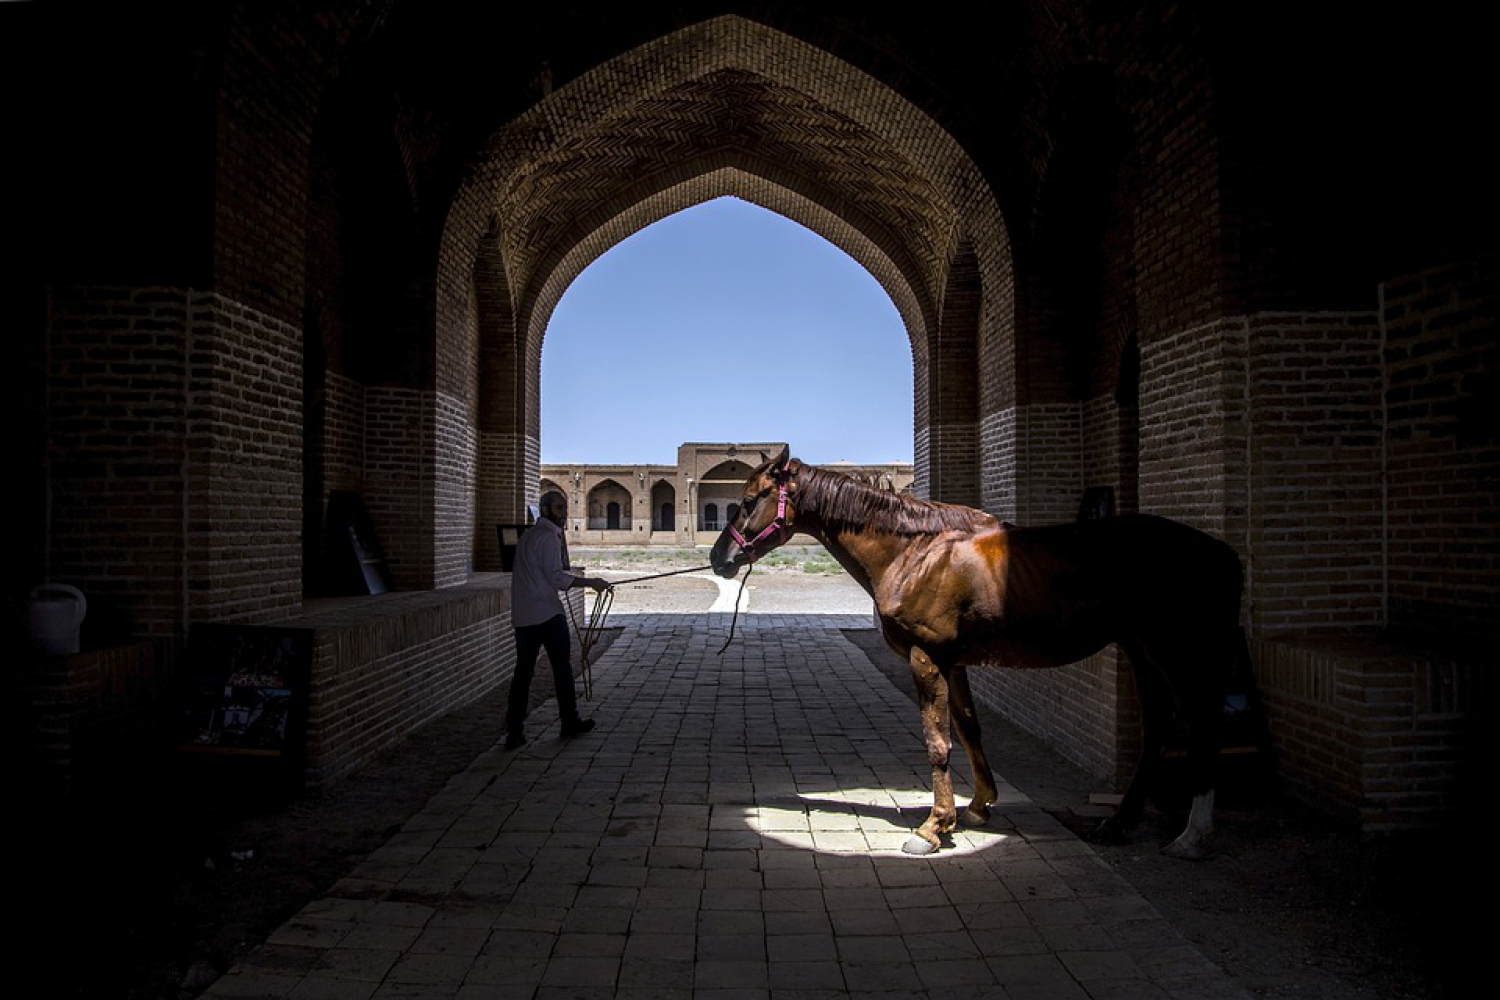 How new equestrian start-up in the UAE jumped clear of the coronavirus crisis